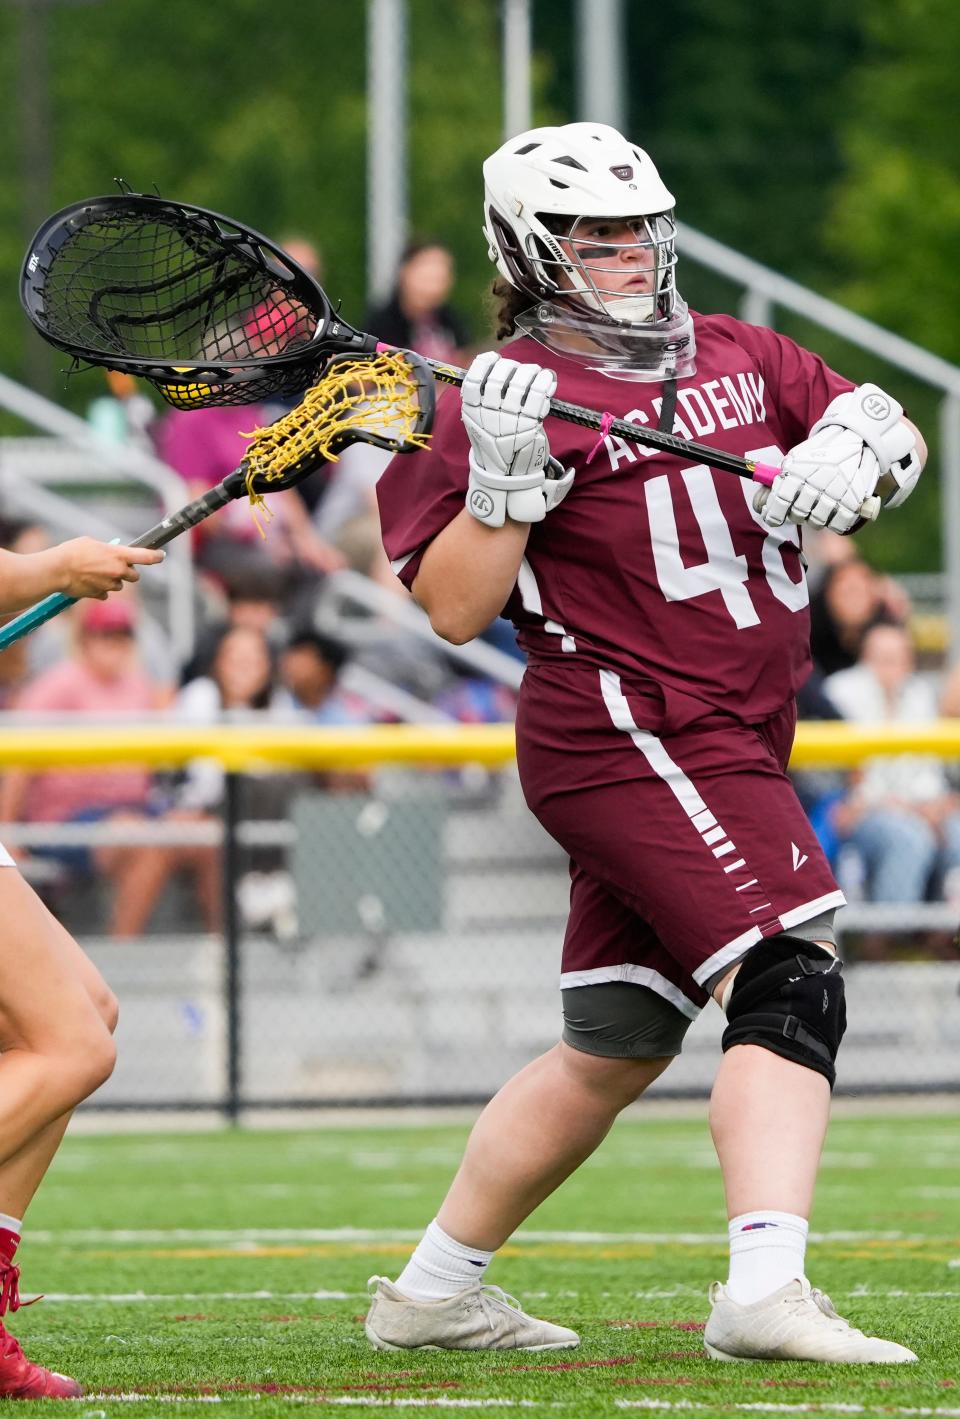 Fri., May 27, 2022; Columbus, Ohio, USA; Columbus Academy Vikings goaltender Hannah Simpson (48) looks to pass after making a save during the first half of an OHSAA Division II girls' lacrosse regional final between the Bishop Watterson Eagles and the Columbus Academy Vikings at Bishop Watterson High School. Mandatory Credit: Joshua A. Bickel/Columbus Dispatch